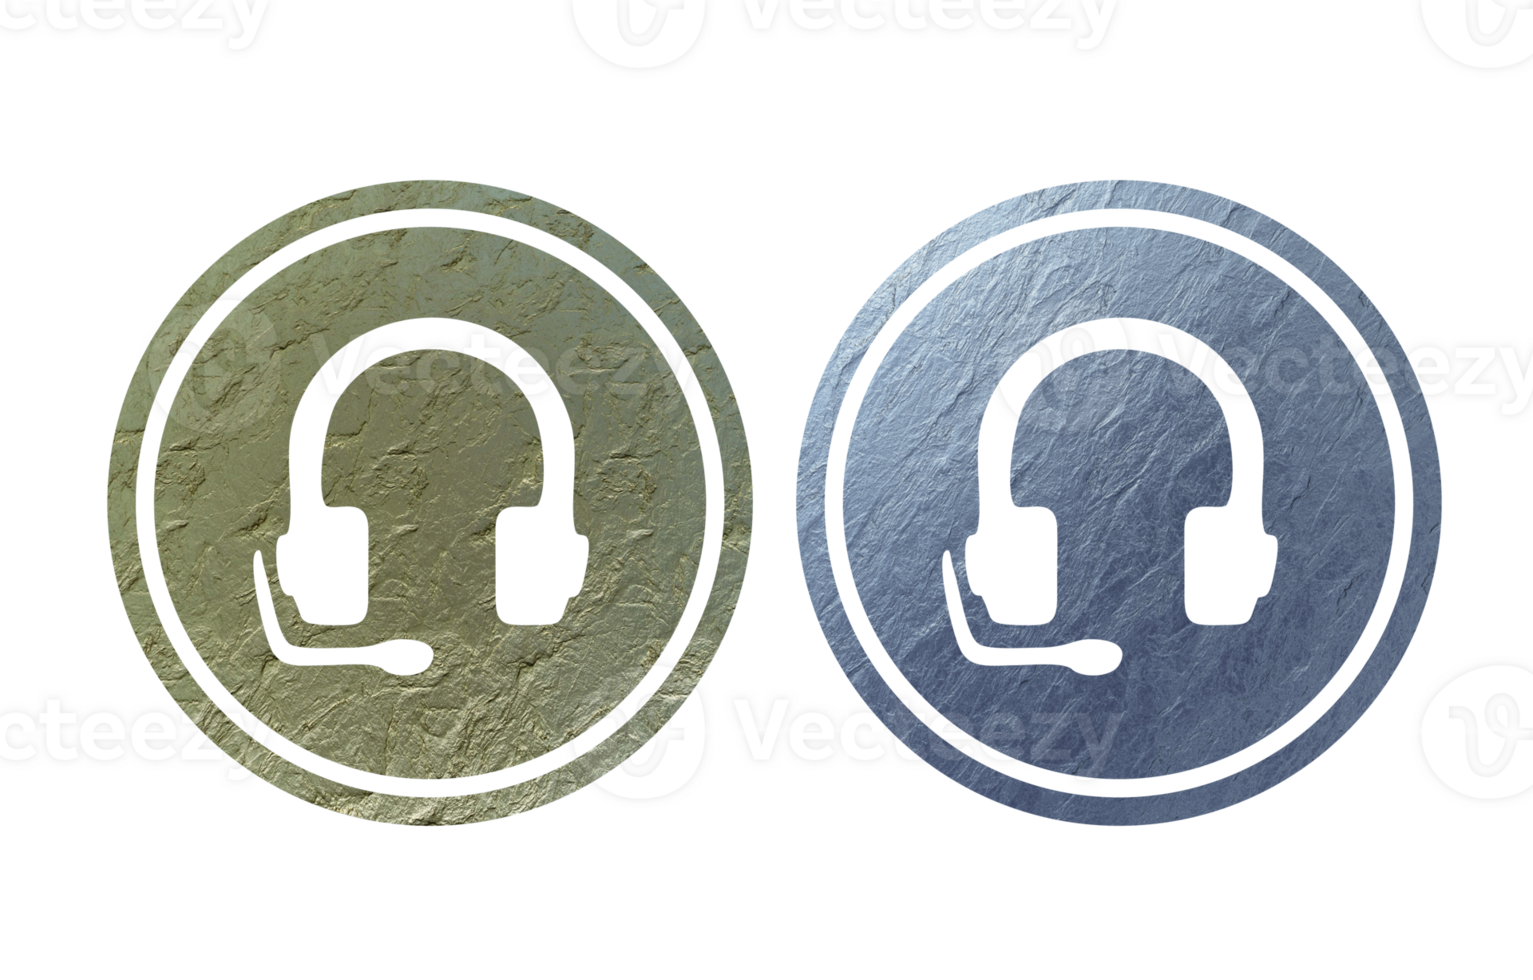 headset icon symbol with texture png